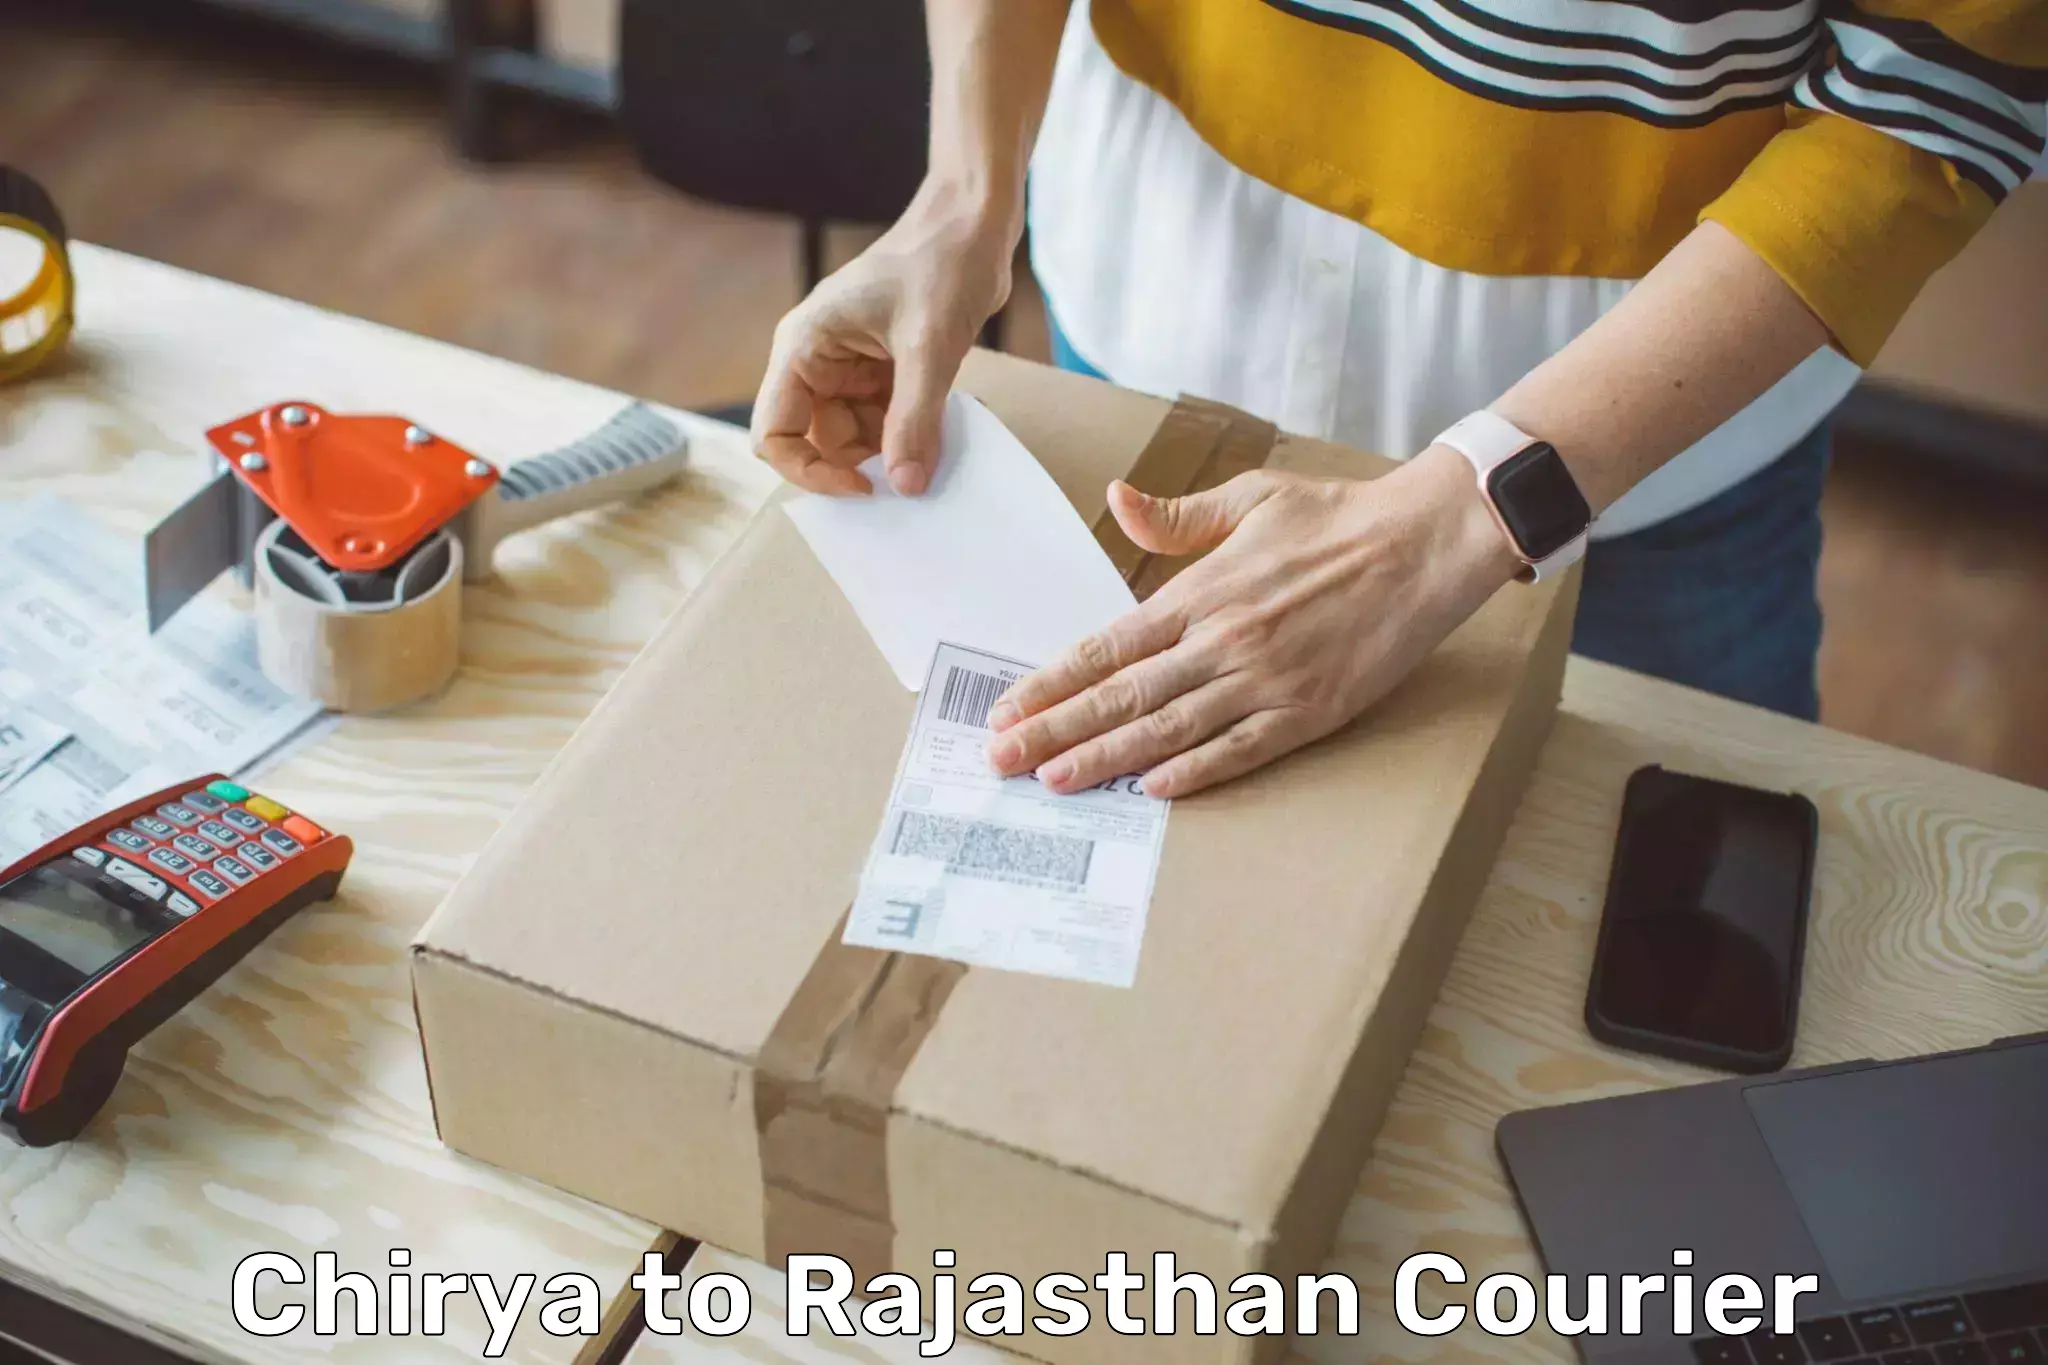 Express delivery network Chirya to Rajasthan